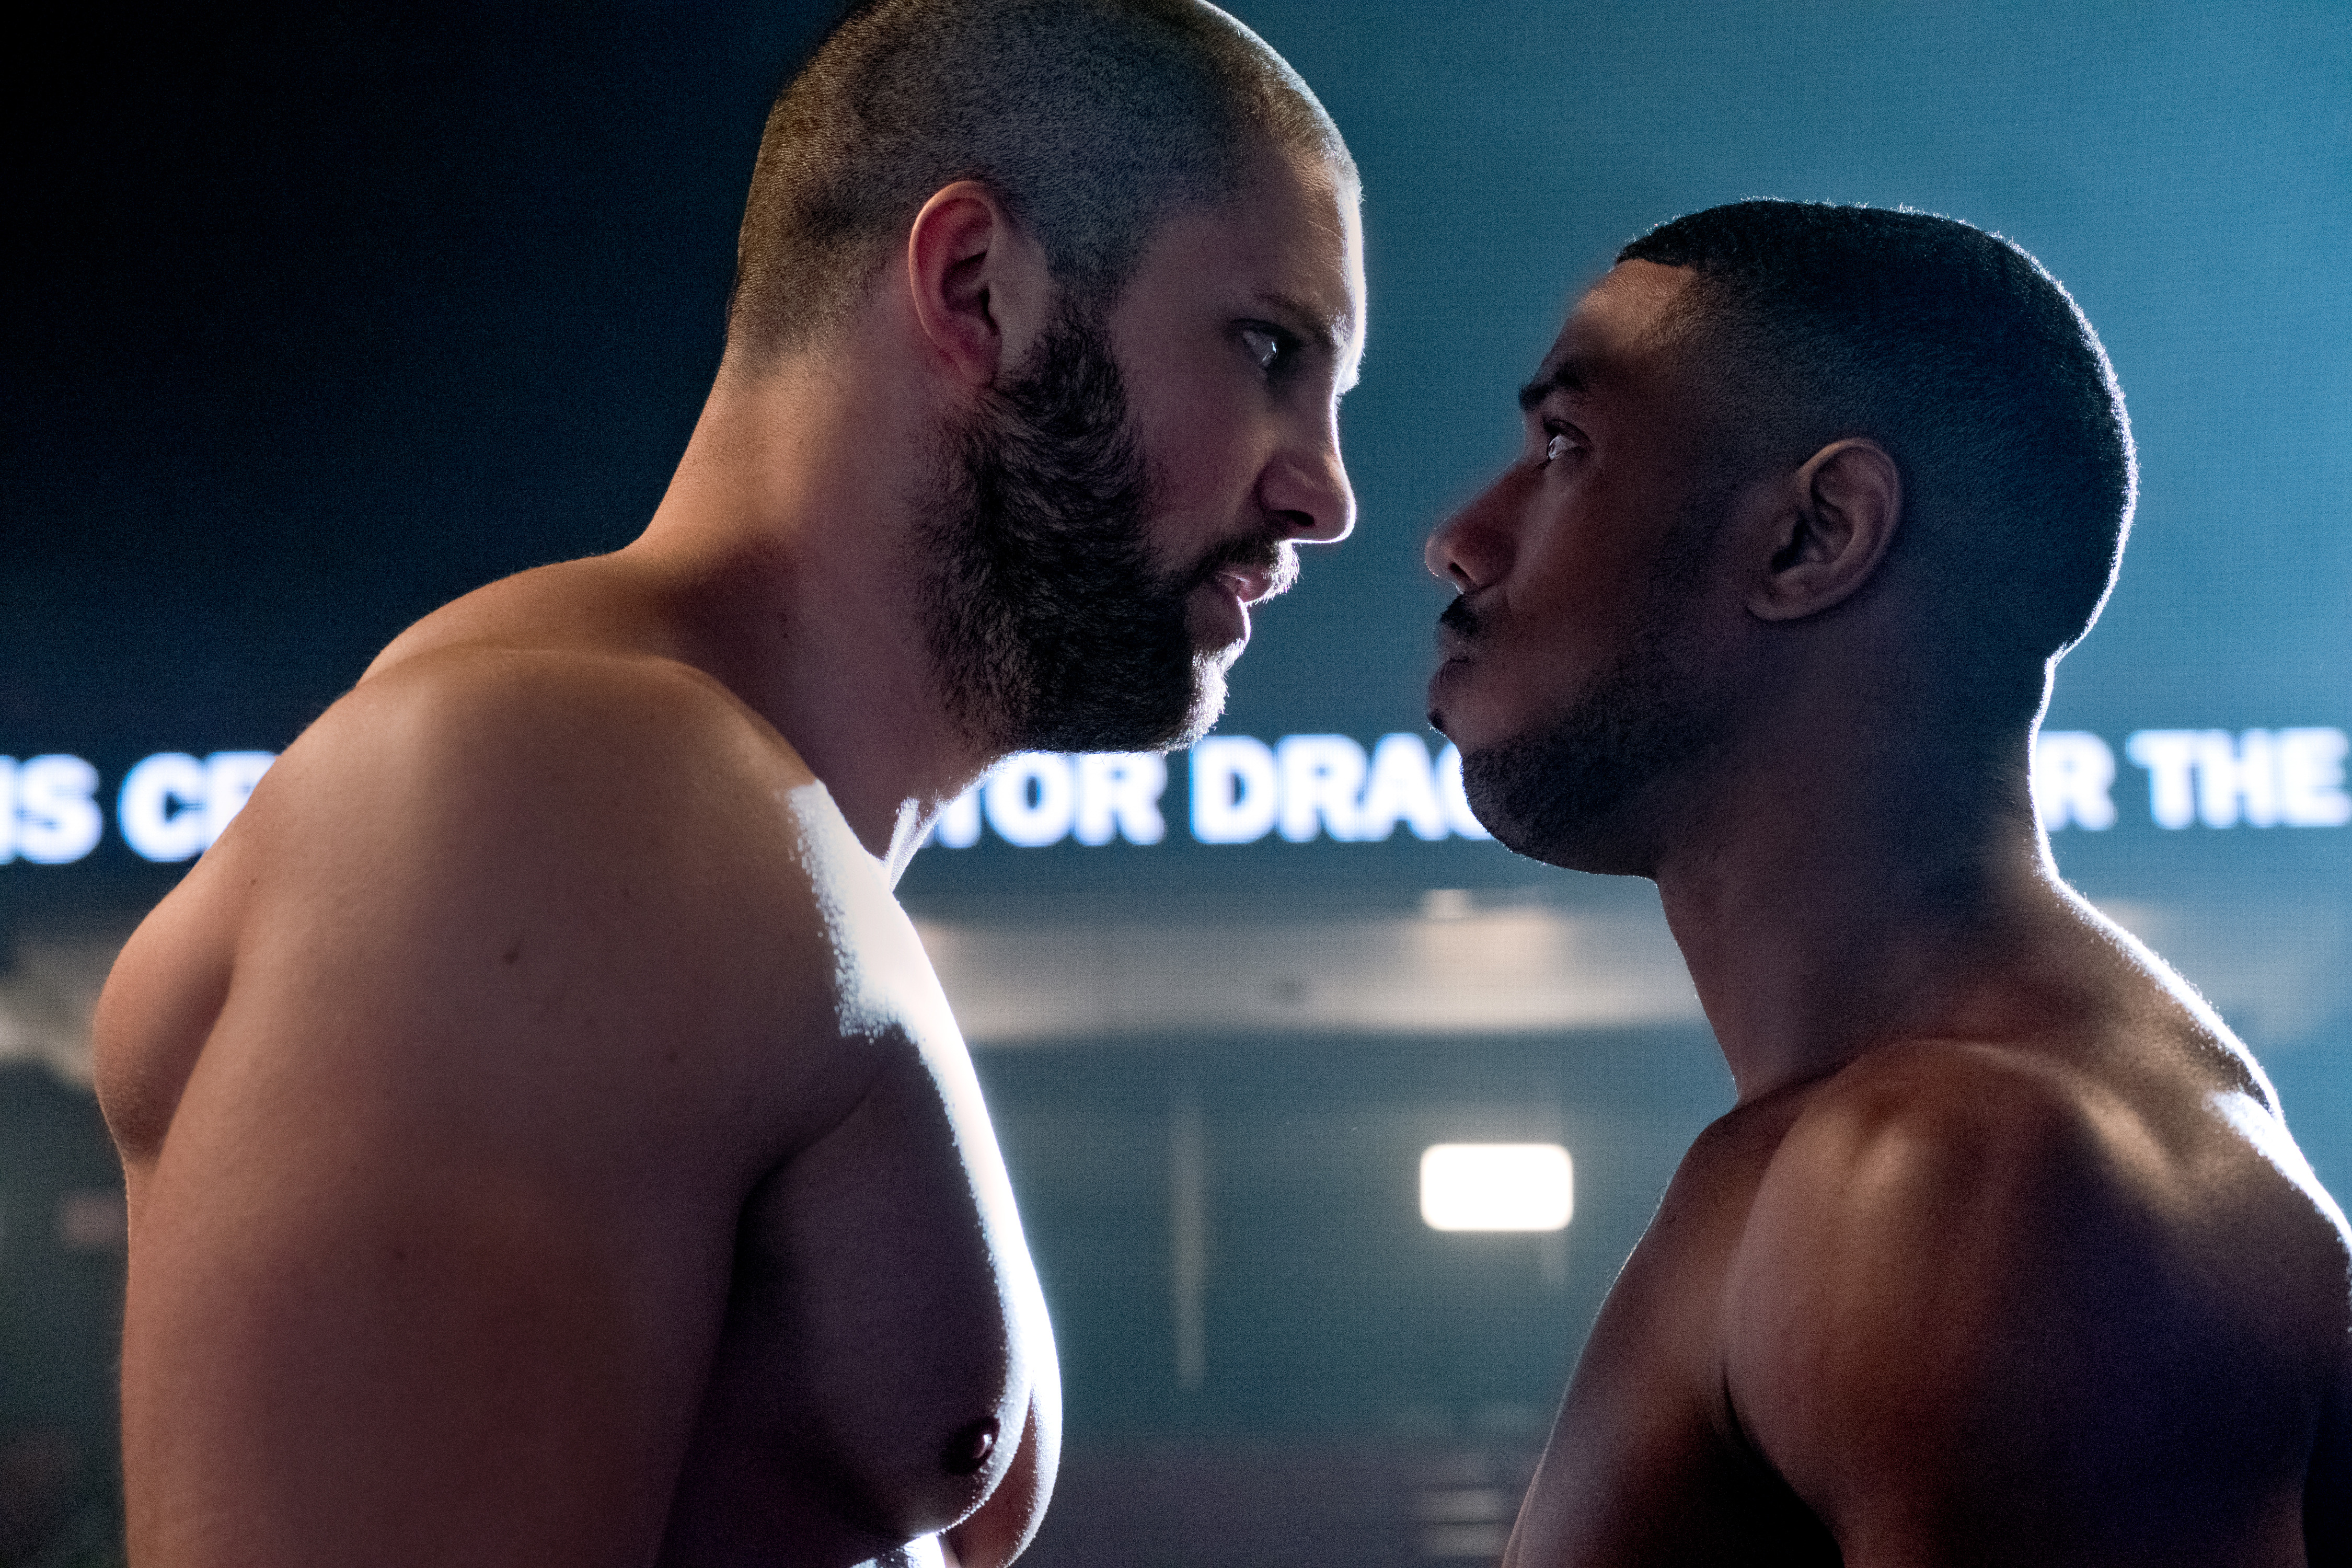 Creed 2' Movie: 19 New Image Show Viktor Drago & Adonis Creed Fight & More